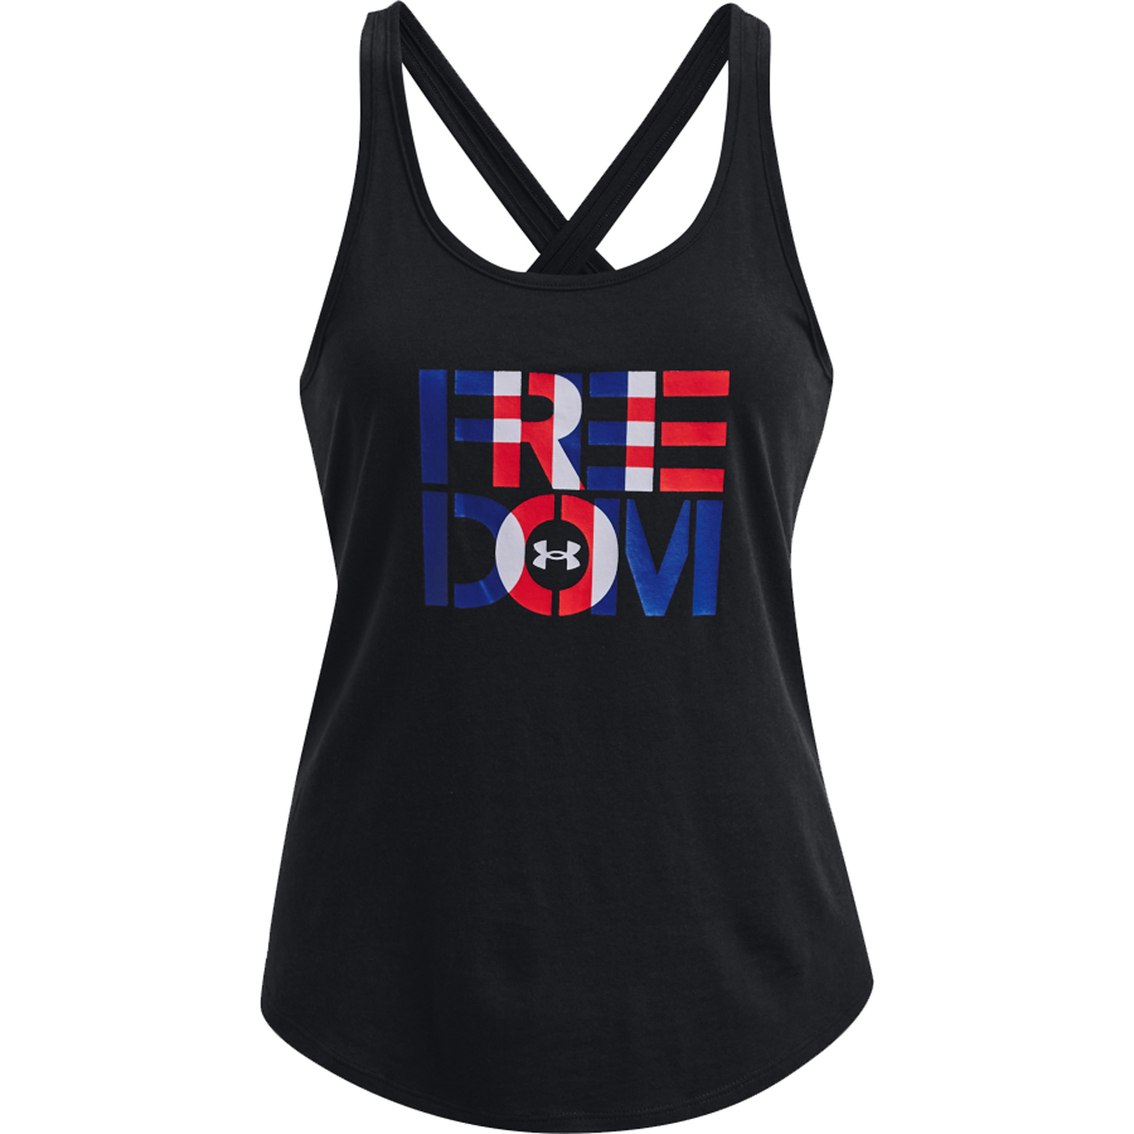 Under Armour Freedom Tank - Image 1 of 2